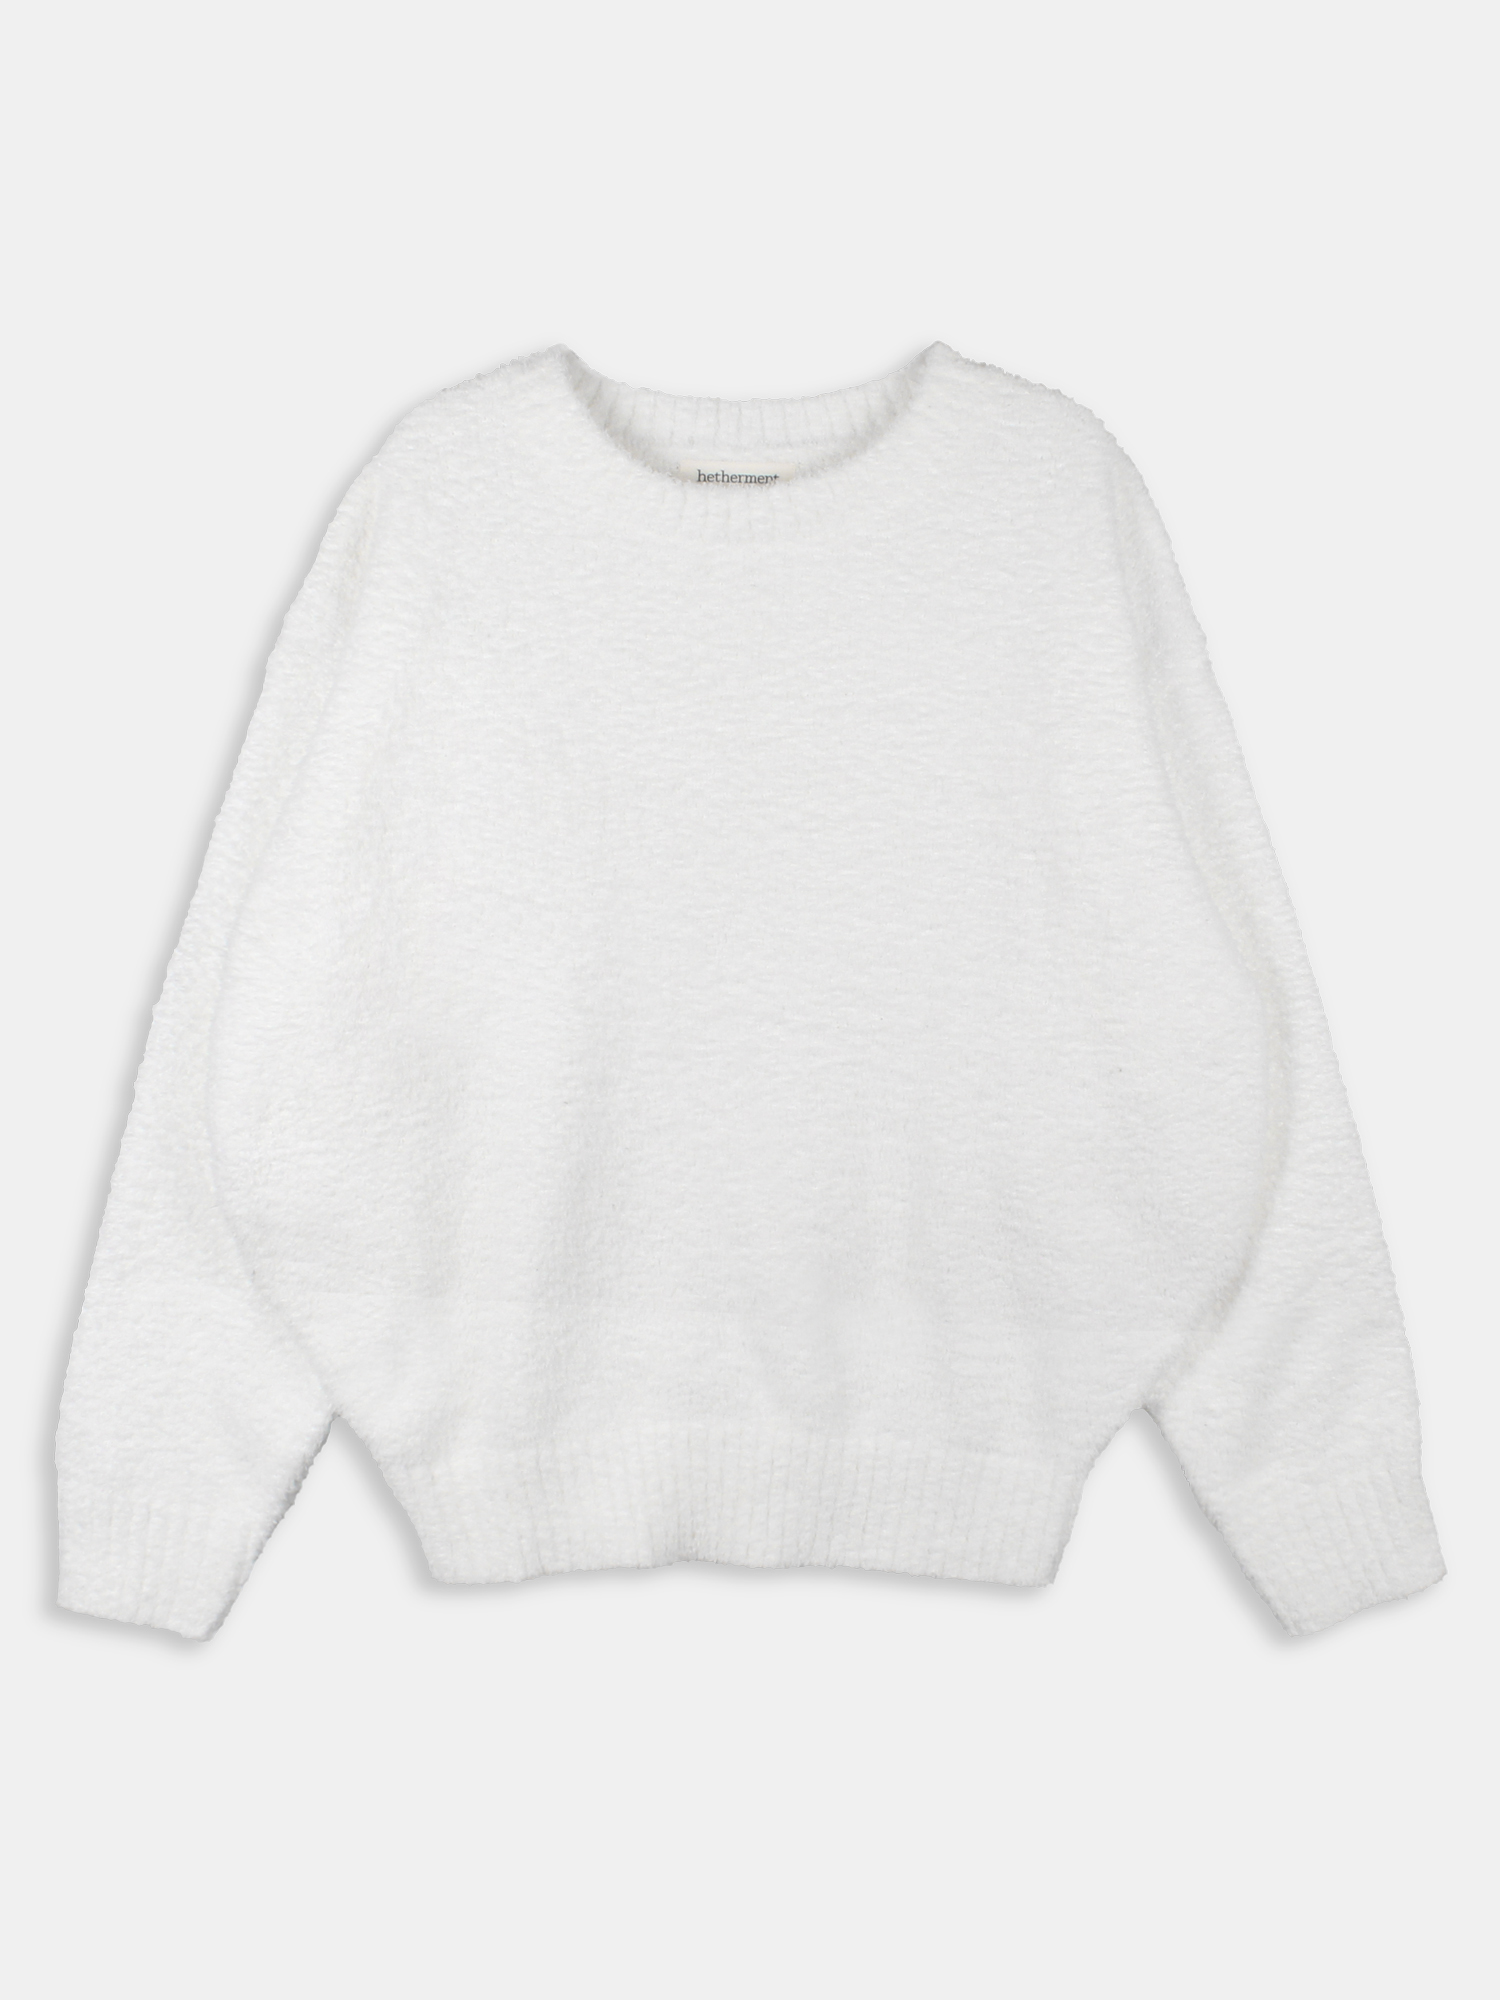 downy pullover (white)